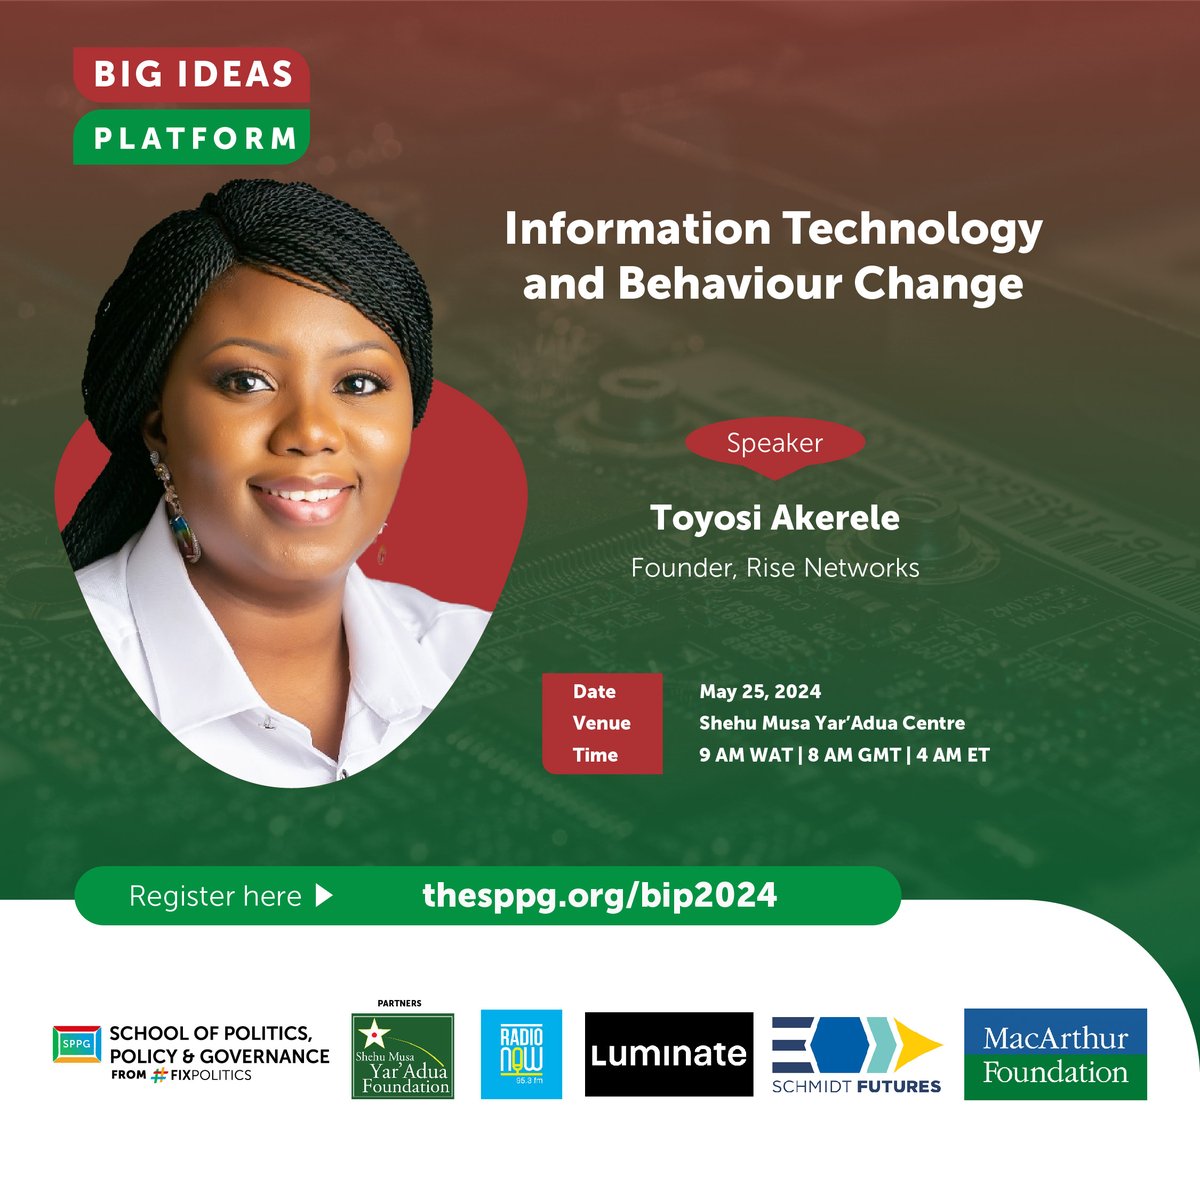 We are pleased to present an esteemed speaker for the Big Ideas Platform 2024 - Toyosi Akerele @toyosirise. Toyosi is the visionary founder of Rise Networks. She has pioneered transformative education initiatives in Lagos, focusing on AI, data science, and workforce readiness.…